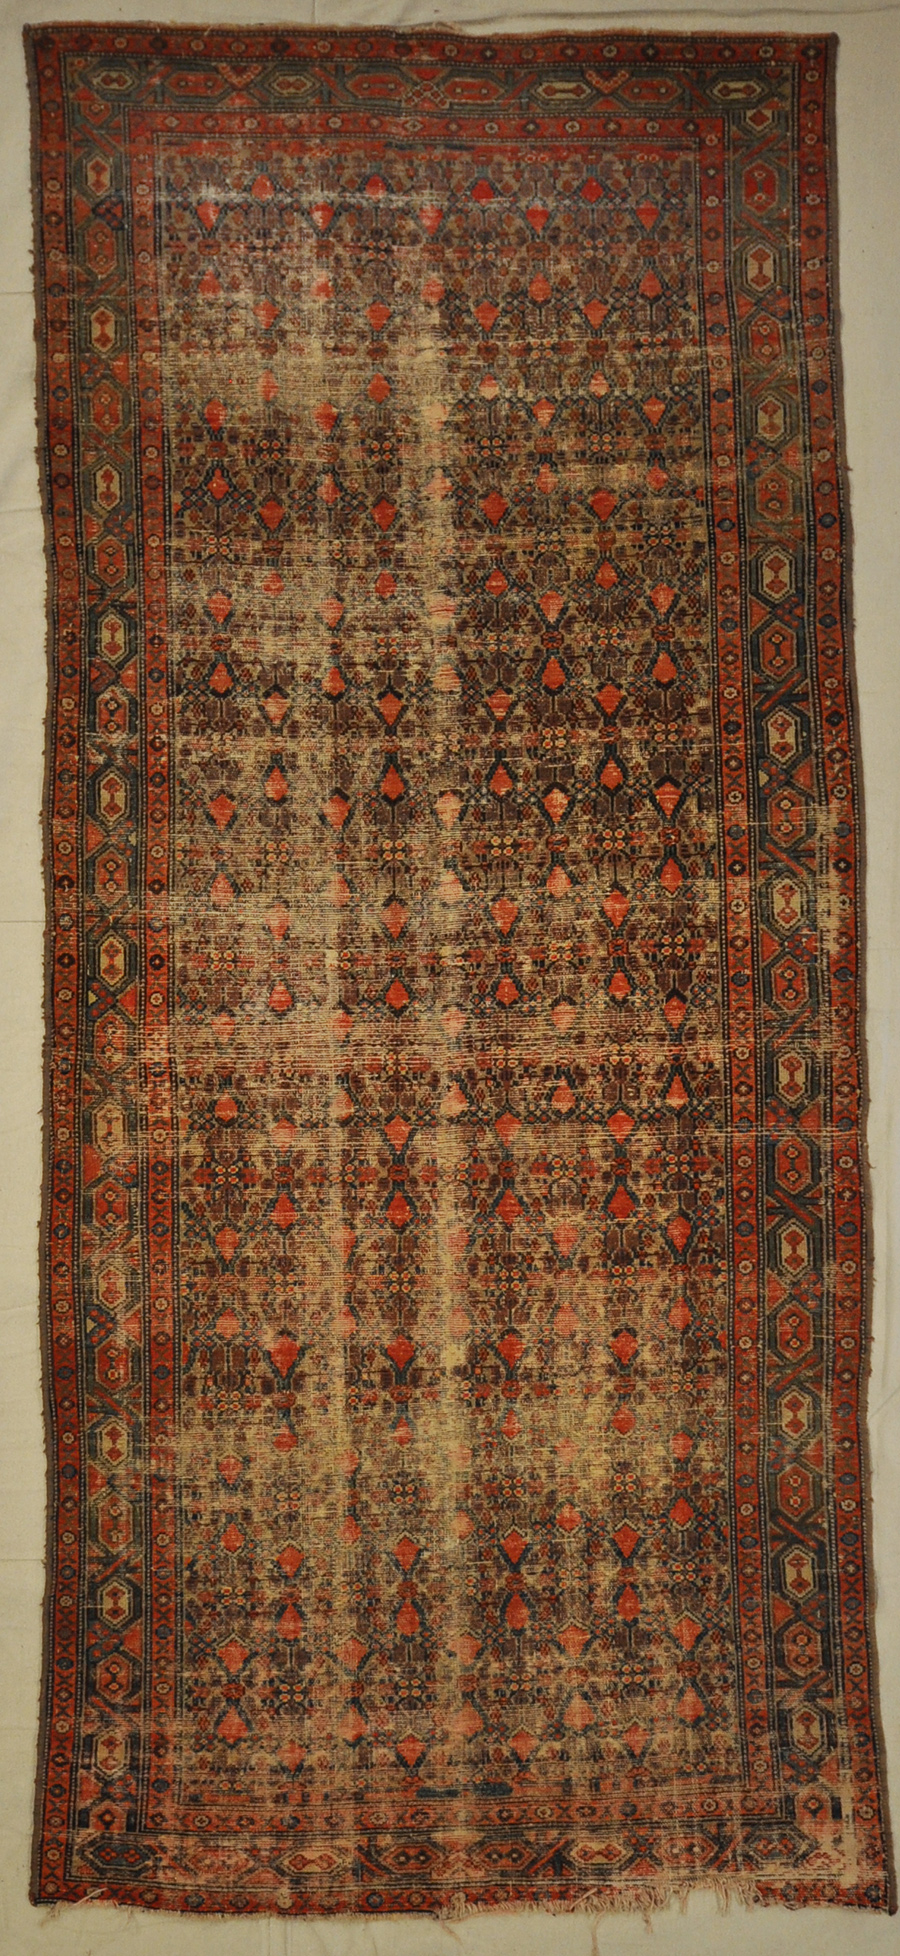 Antique Malayer Rugs & More Oriental Carpets 28926 .